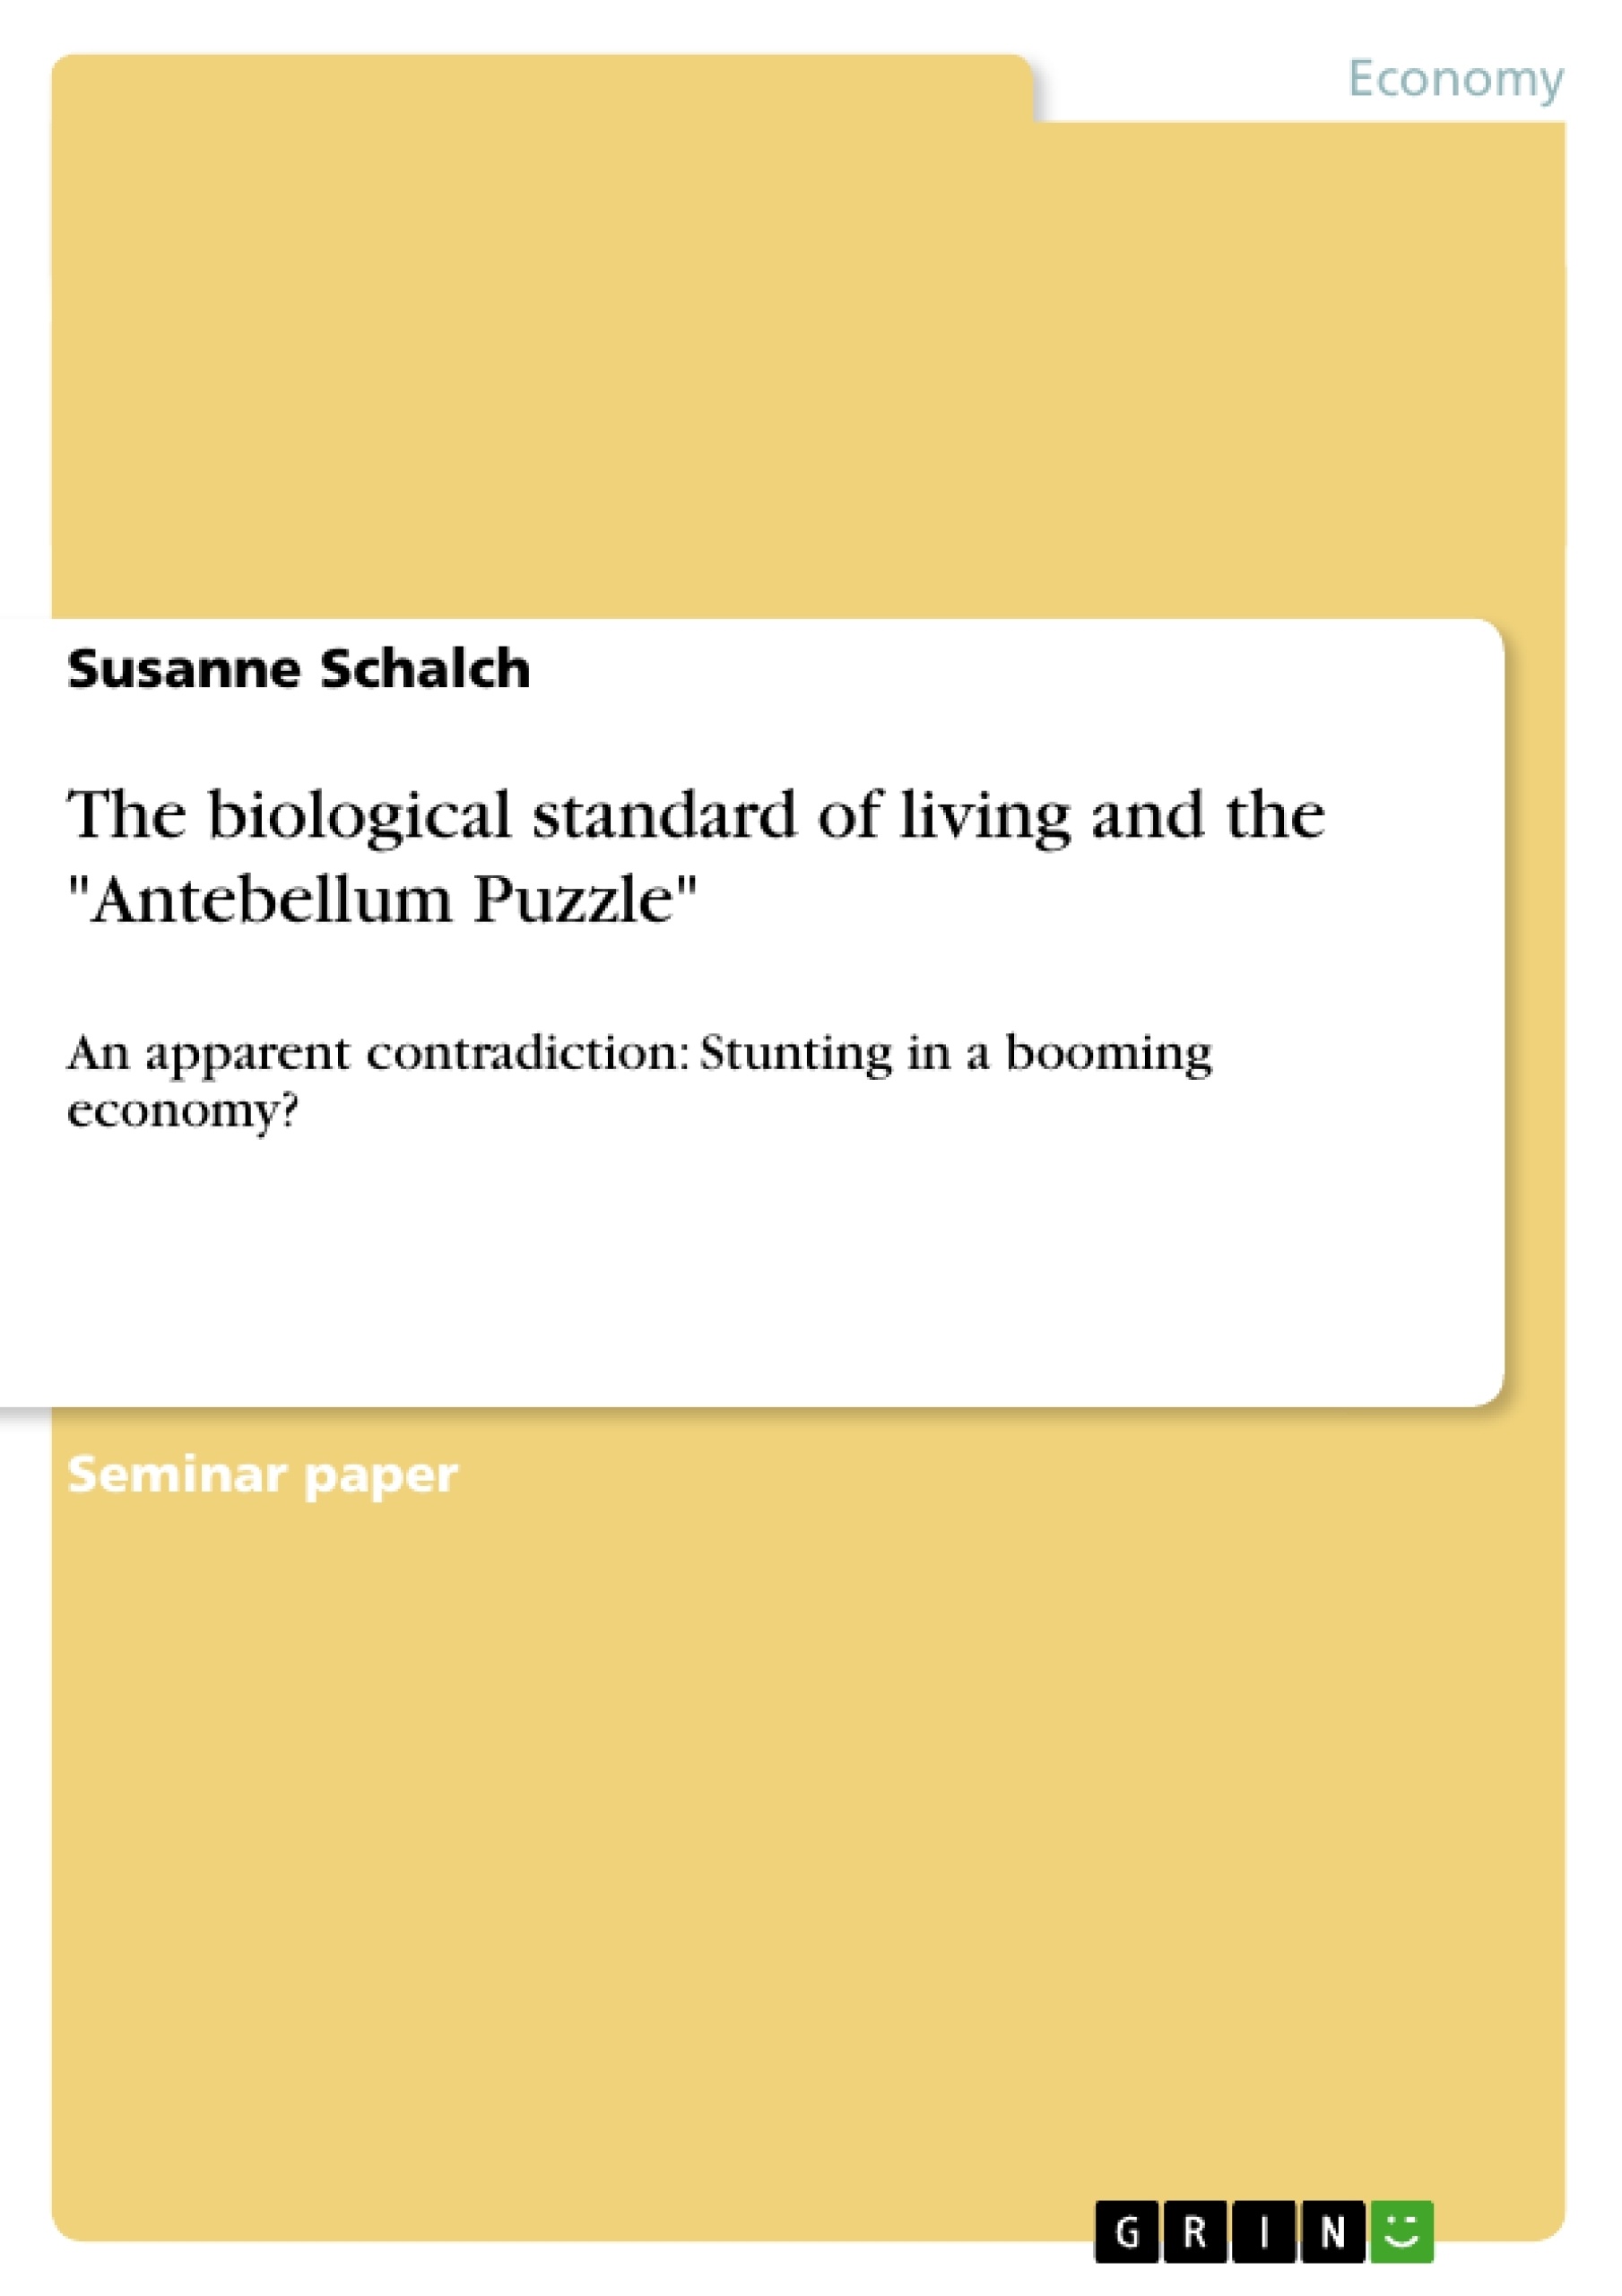 Title: The biological standard of living and the "Antebellum Puzzle"